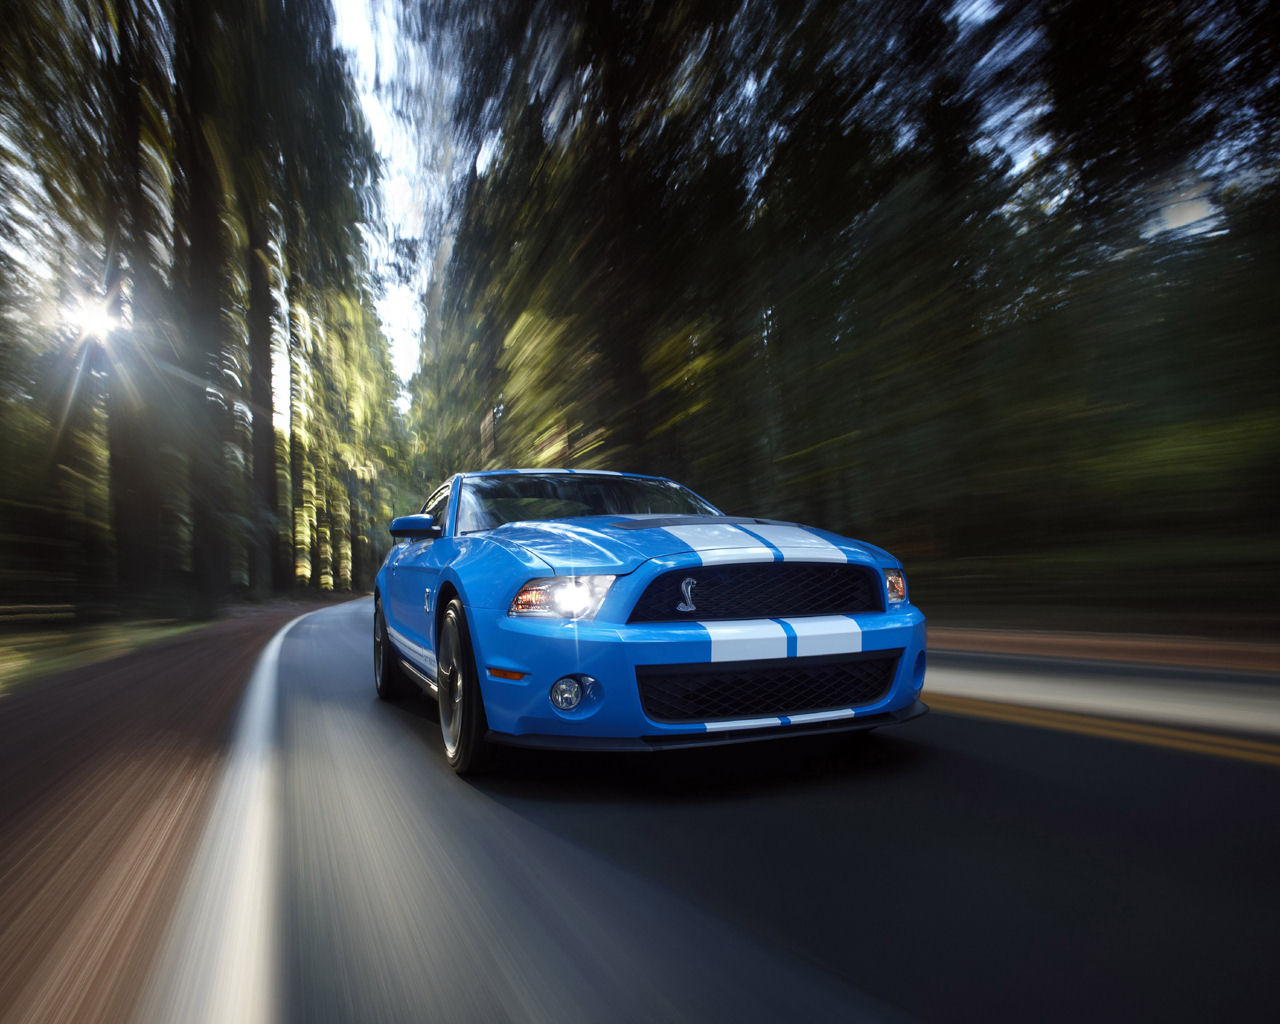 Ford Mustang Shelby Gt500 Convertible Wallpaper